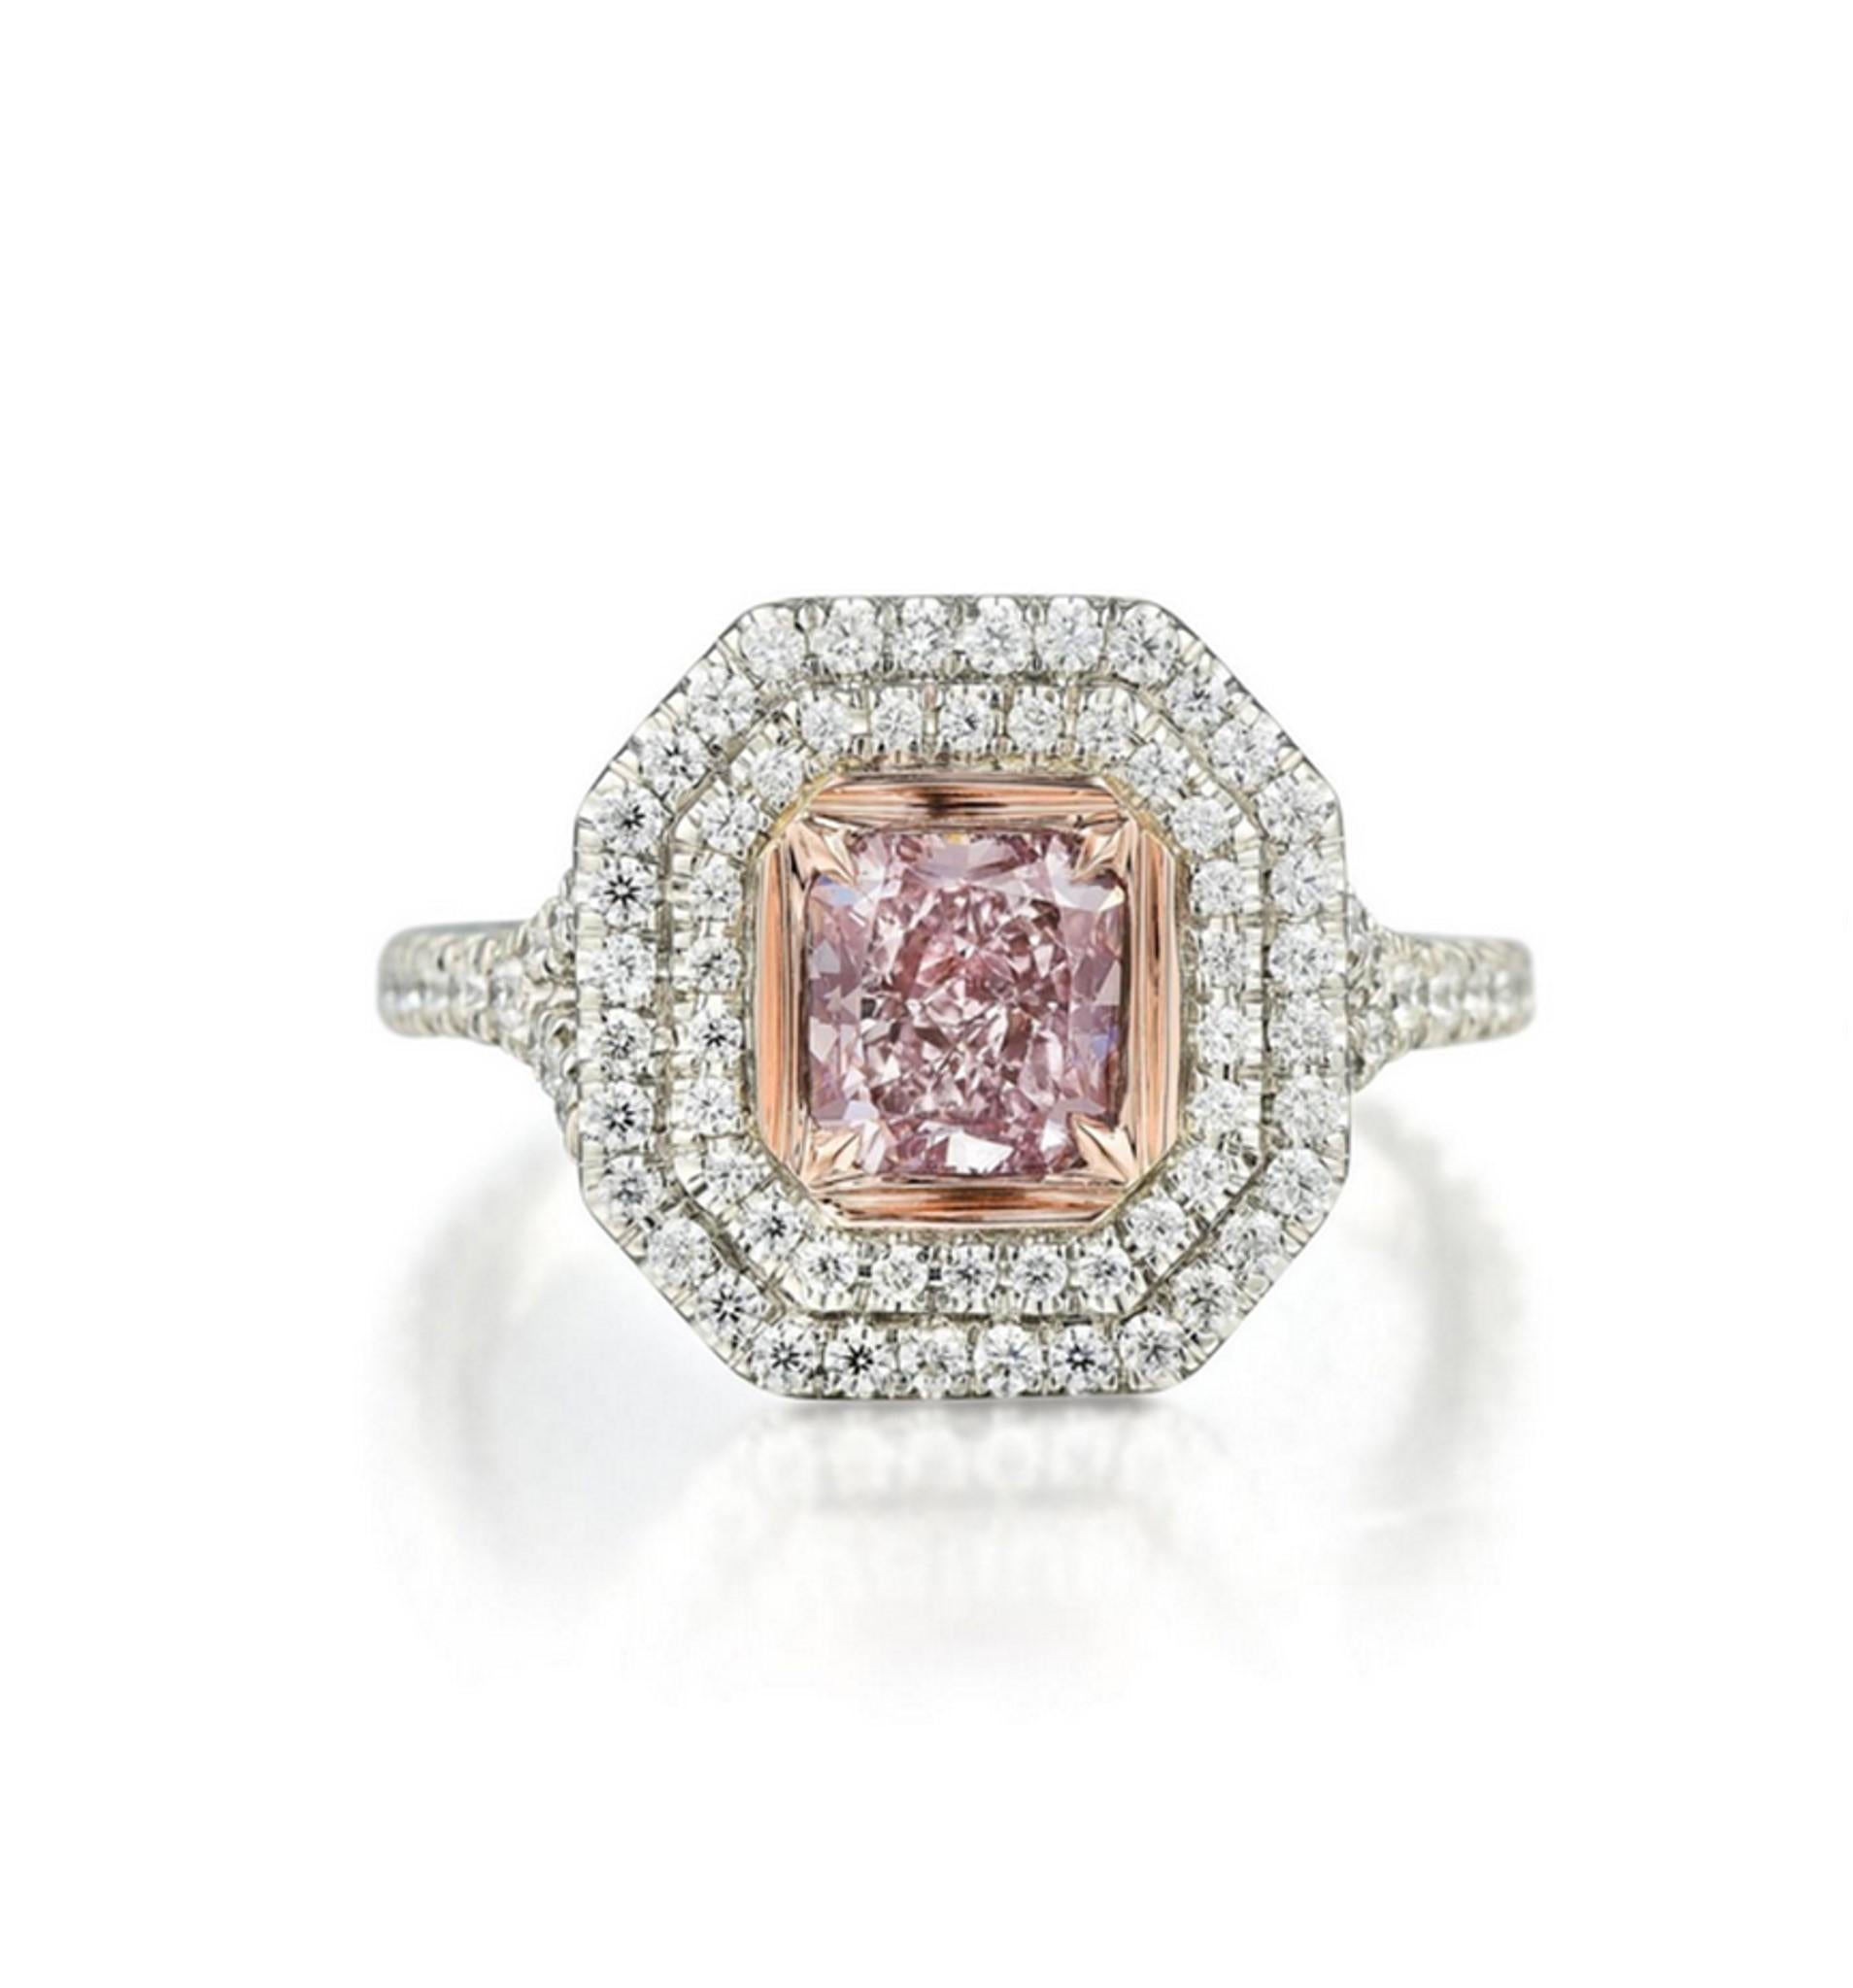 Incredible Deal on GIA Certified 1.00 carat Radiant Cut,  Natural Fancy Purple-Pink Even Diamond Ring, SI1 clarity, measuring 5.71-5.32x3.52. Total Carat Weight on the ring is 1.60.
GIA CERTIFICATE #1182670842 . This classic contemporary mounting